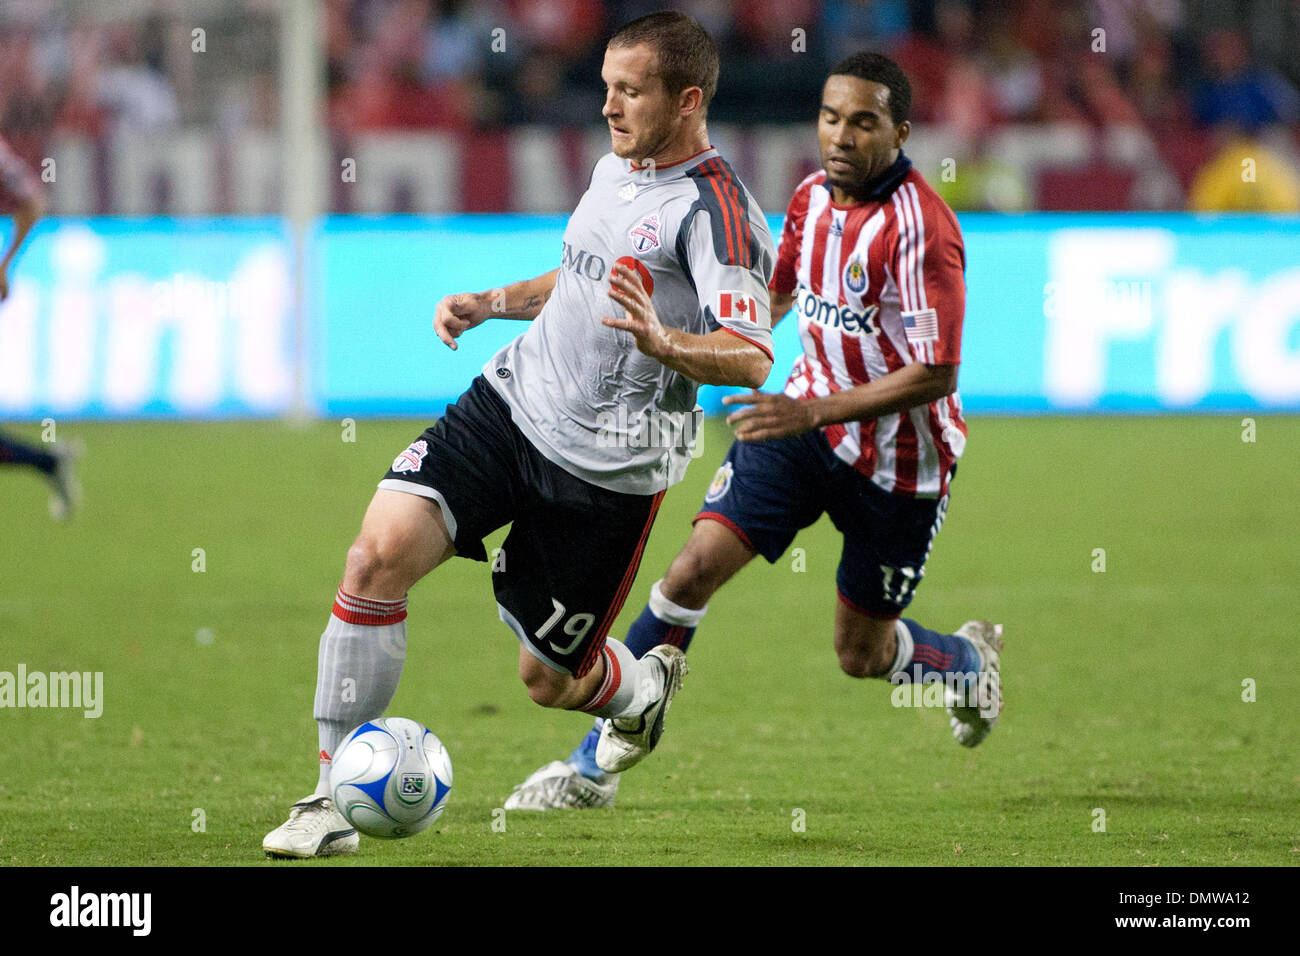 Aug. 22, 2009 - Carson, California, U.S - Chad Barrett (L) dribbles away from Maykel Galindo (R) during the MLS game between Toronto FC and Chivas USA at the Home Depot Center. (Credit Image: © Brandon Parry/Southcreek Global/ZUMAPRESS.com) Stock Photo